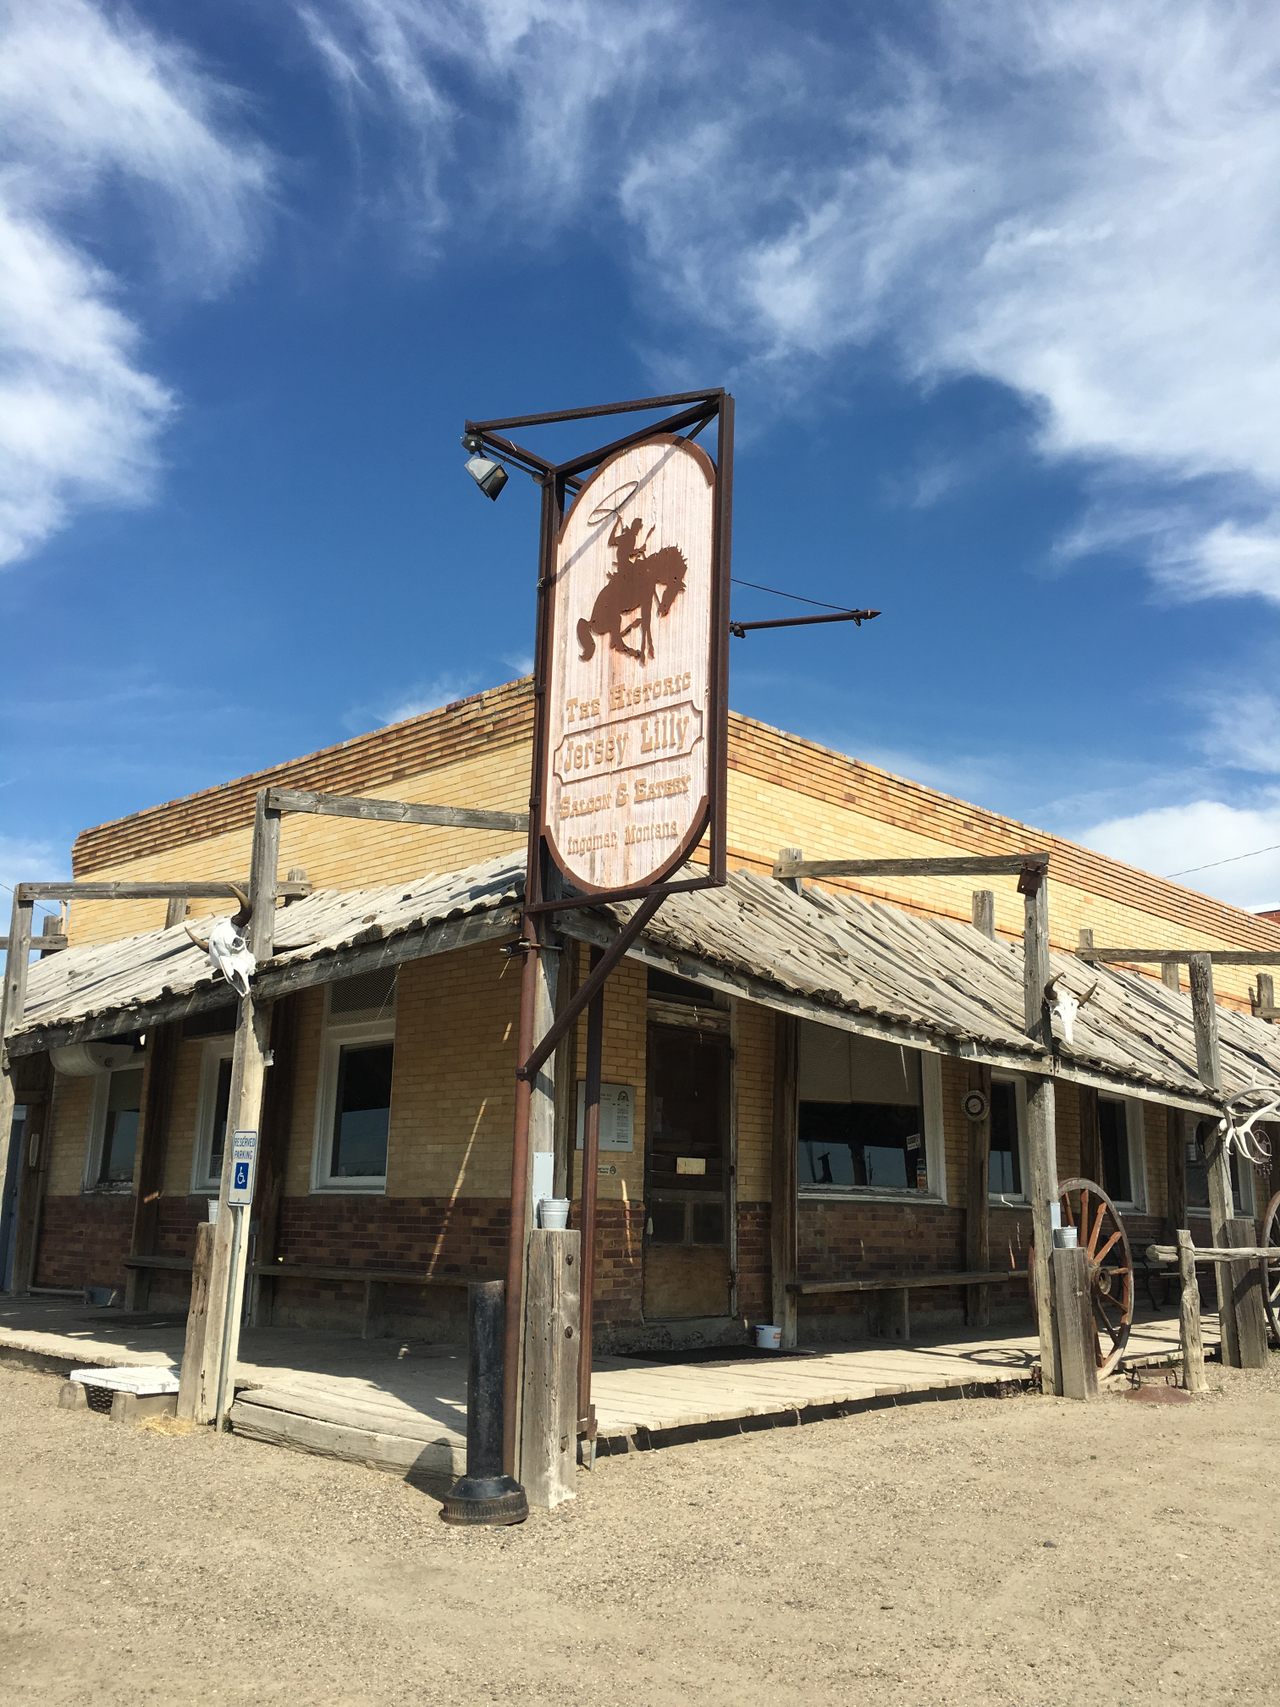 The historic bar has been a meeting point for area cowhands and sheepherders for nearly a century.